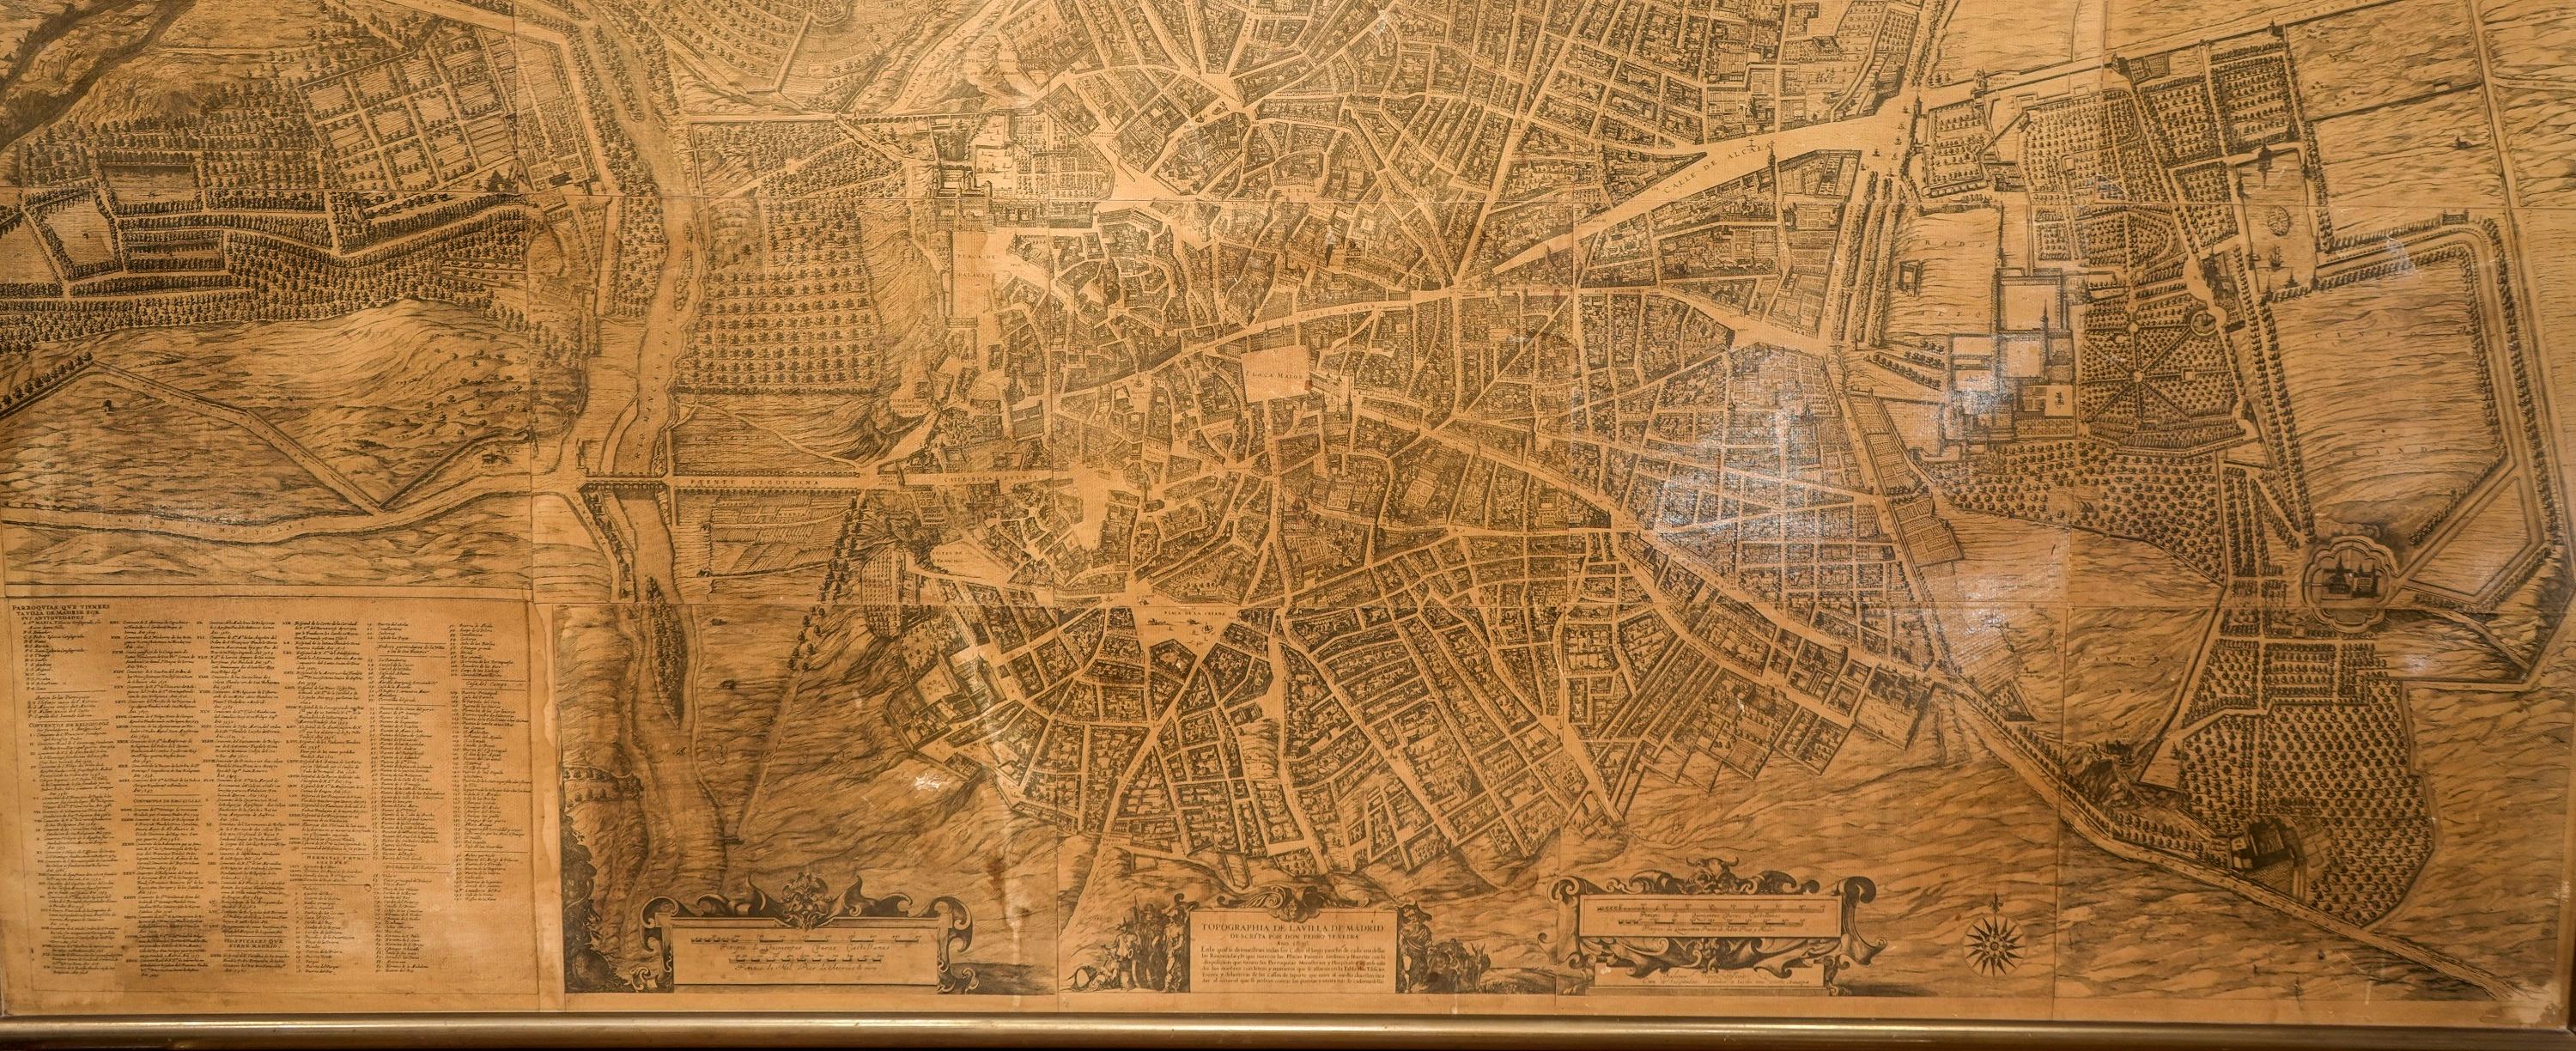 Beautiful map in gold color copy of the famous map of the Portuguese cartographer Pedro Texeira( Lisbonne 1595-Madrid 1662), made in the 17th century during the reign of Felipe IV, king of Spain and Portugal.
It suits in a library. Desk room or